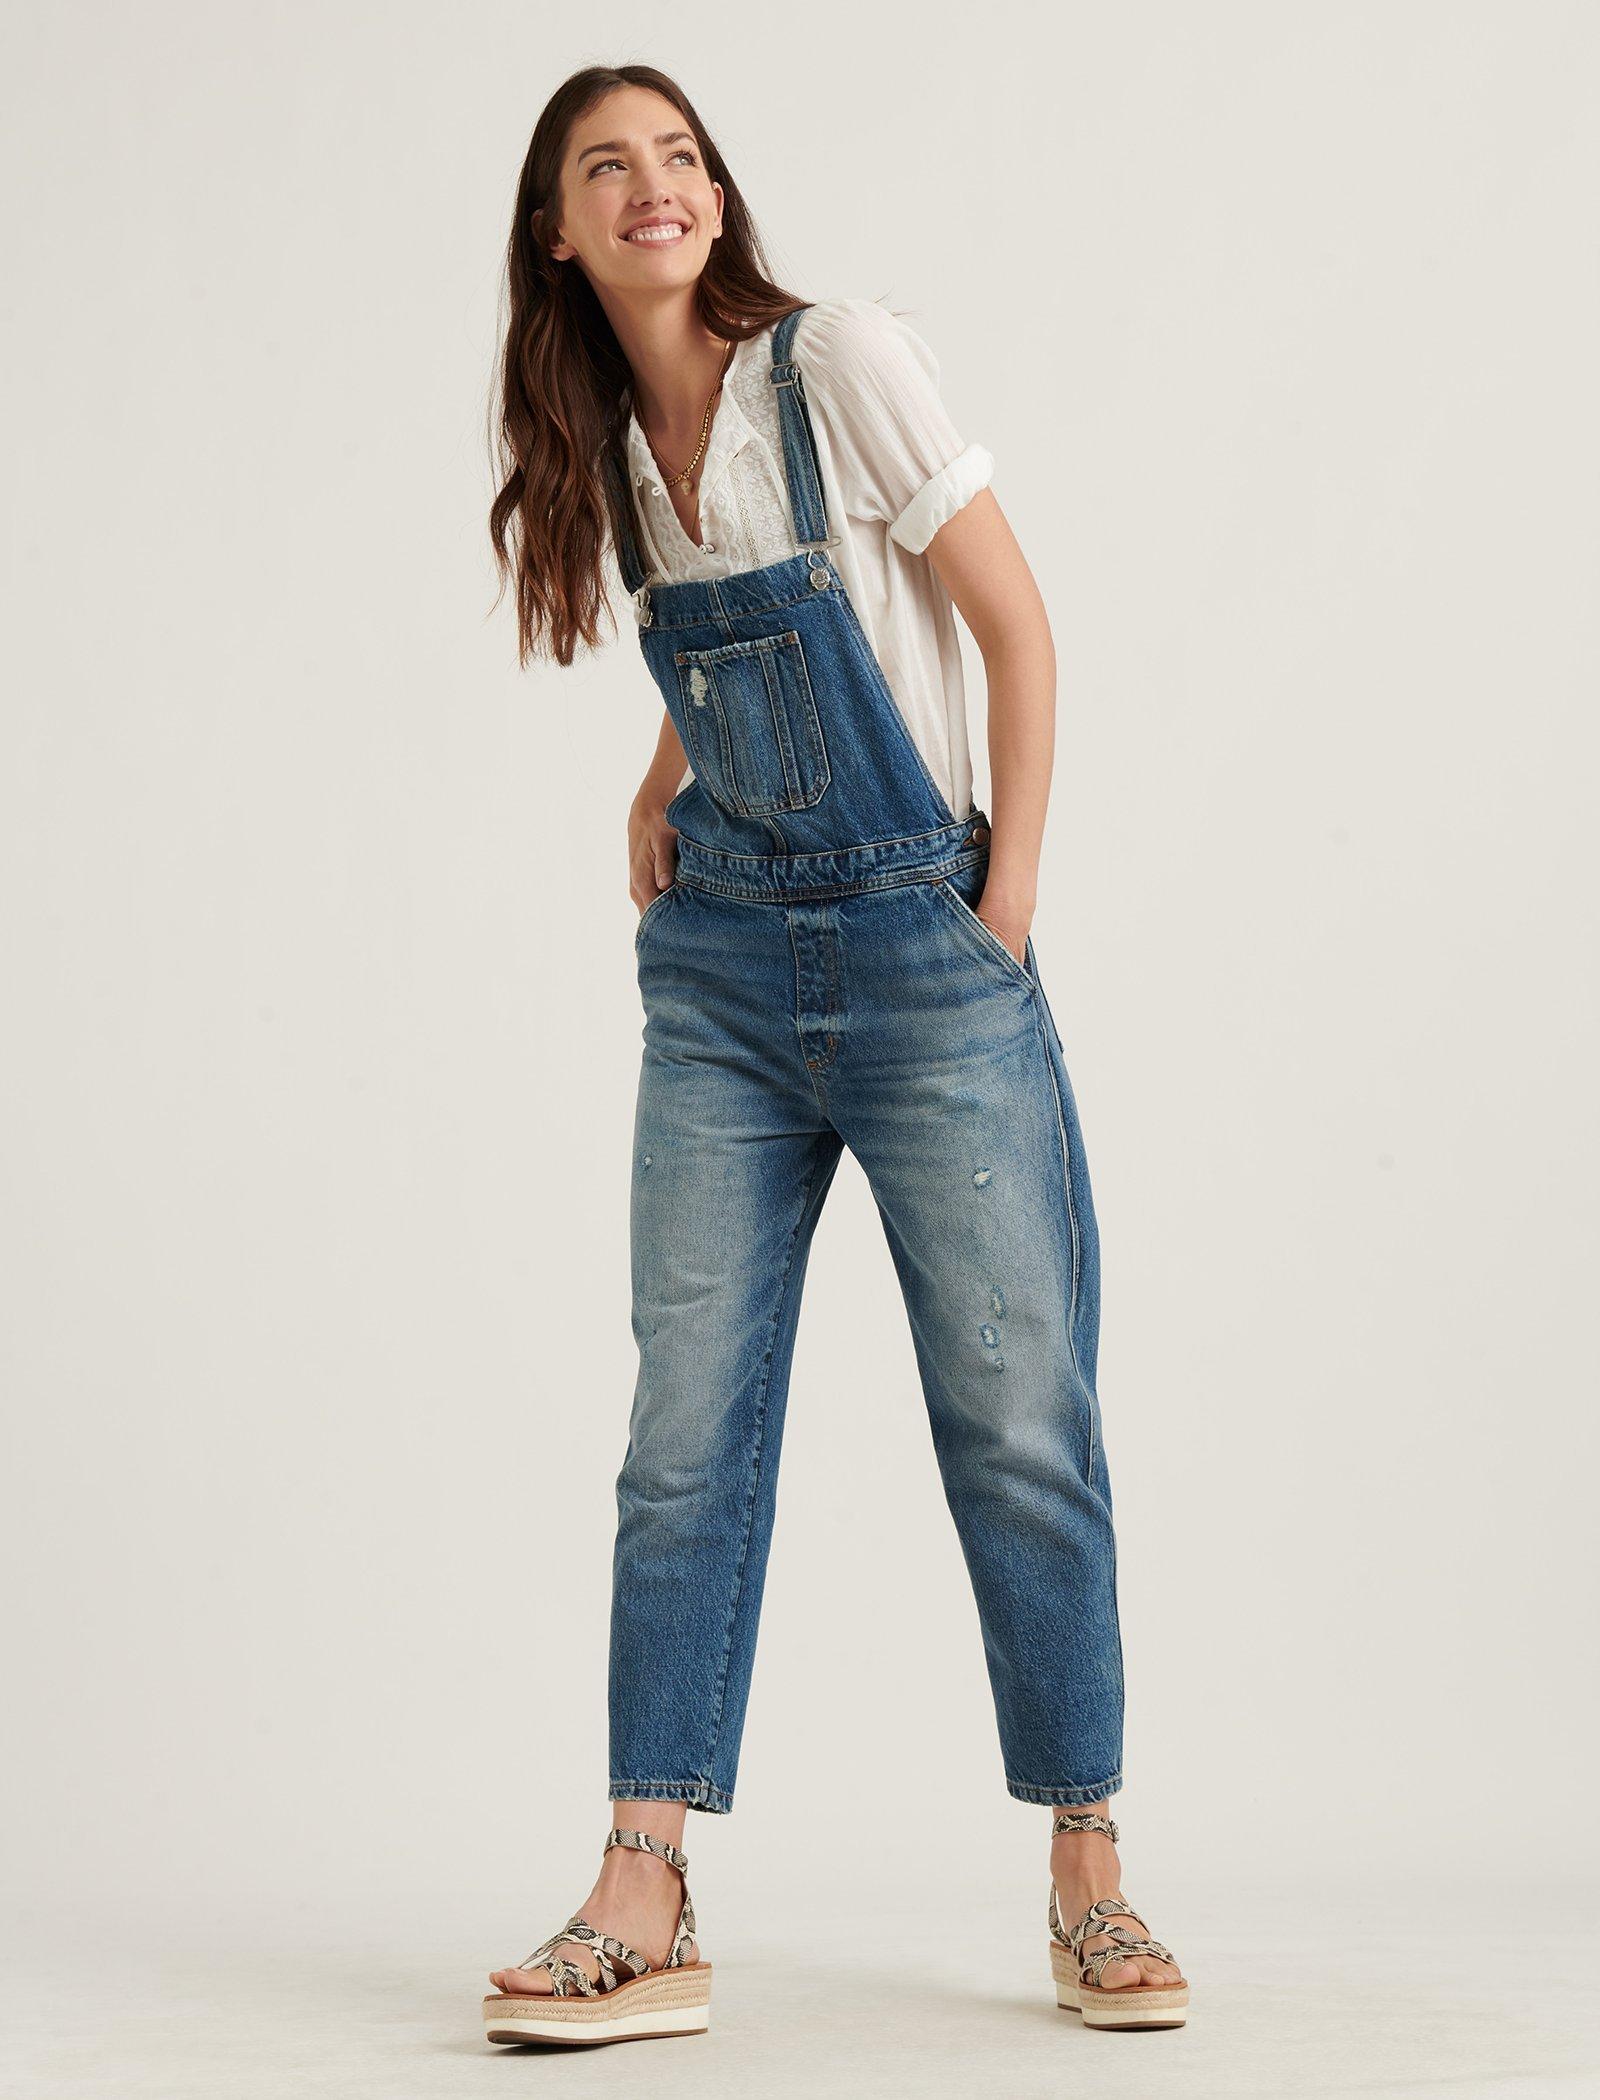 lucky jeans overalls